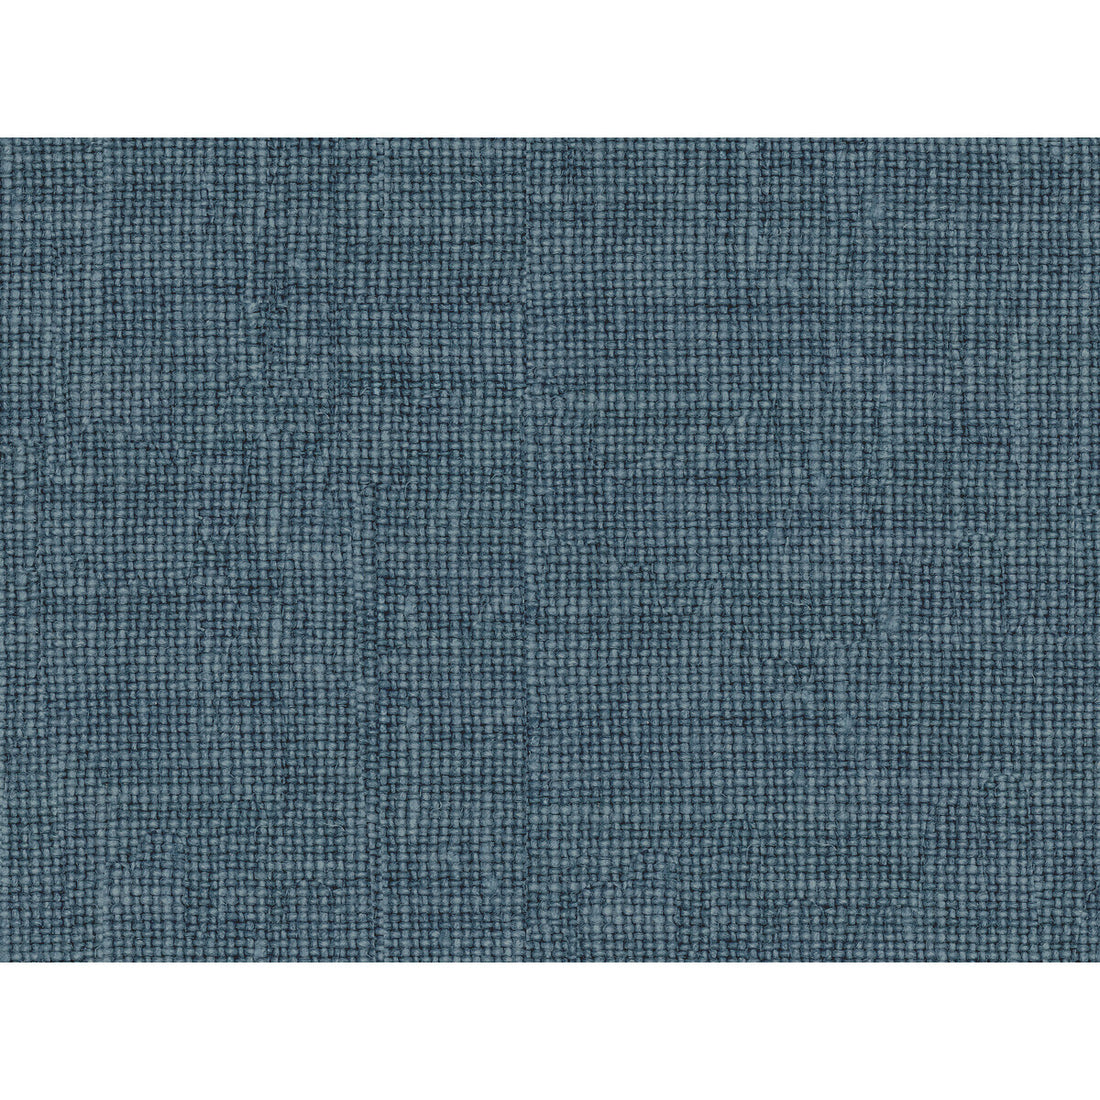 Lille Linen fabric in sea blue color - pattern 2017119.5.0 - by Lee Jofa in the Gis collection